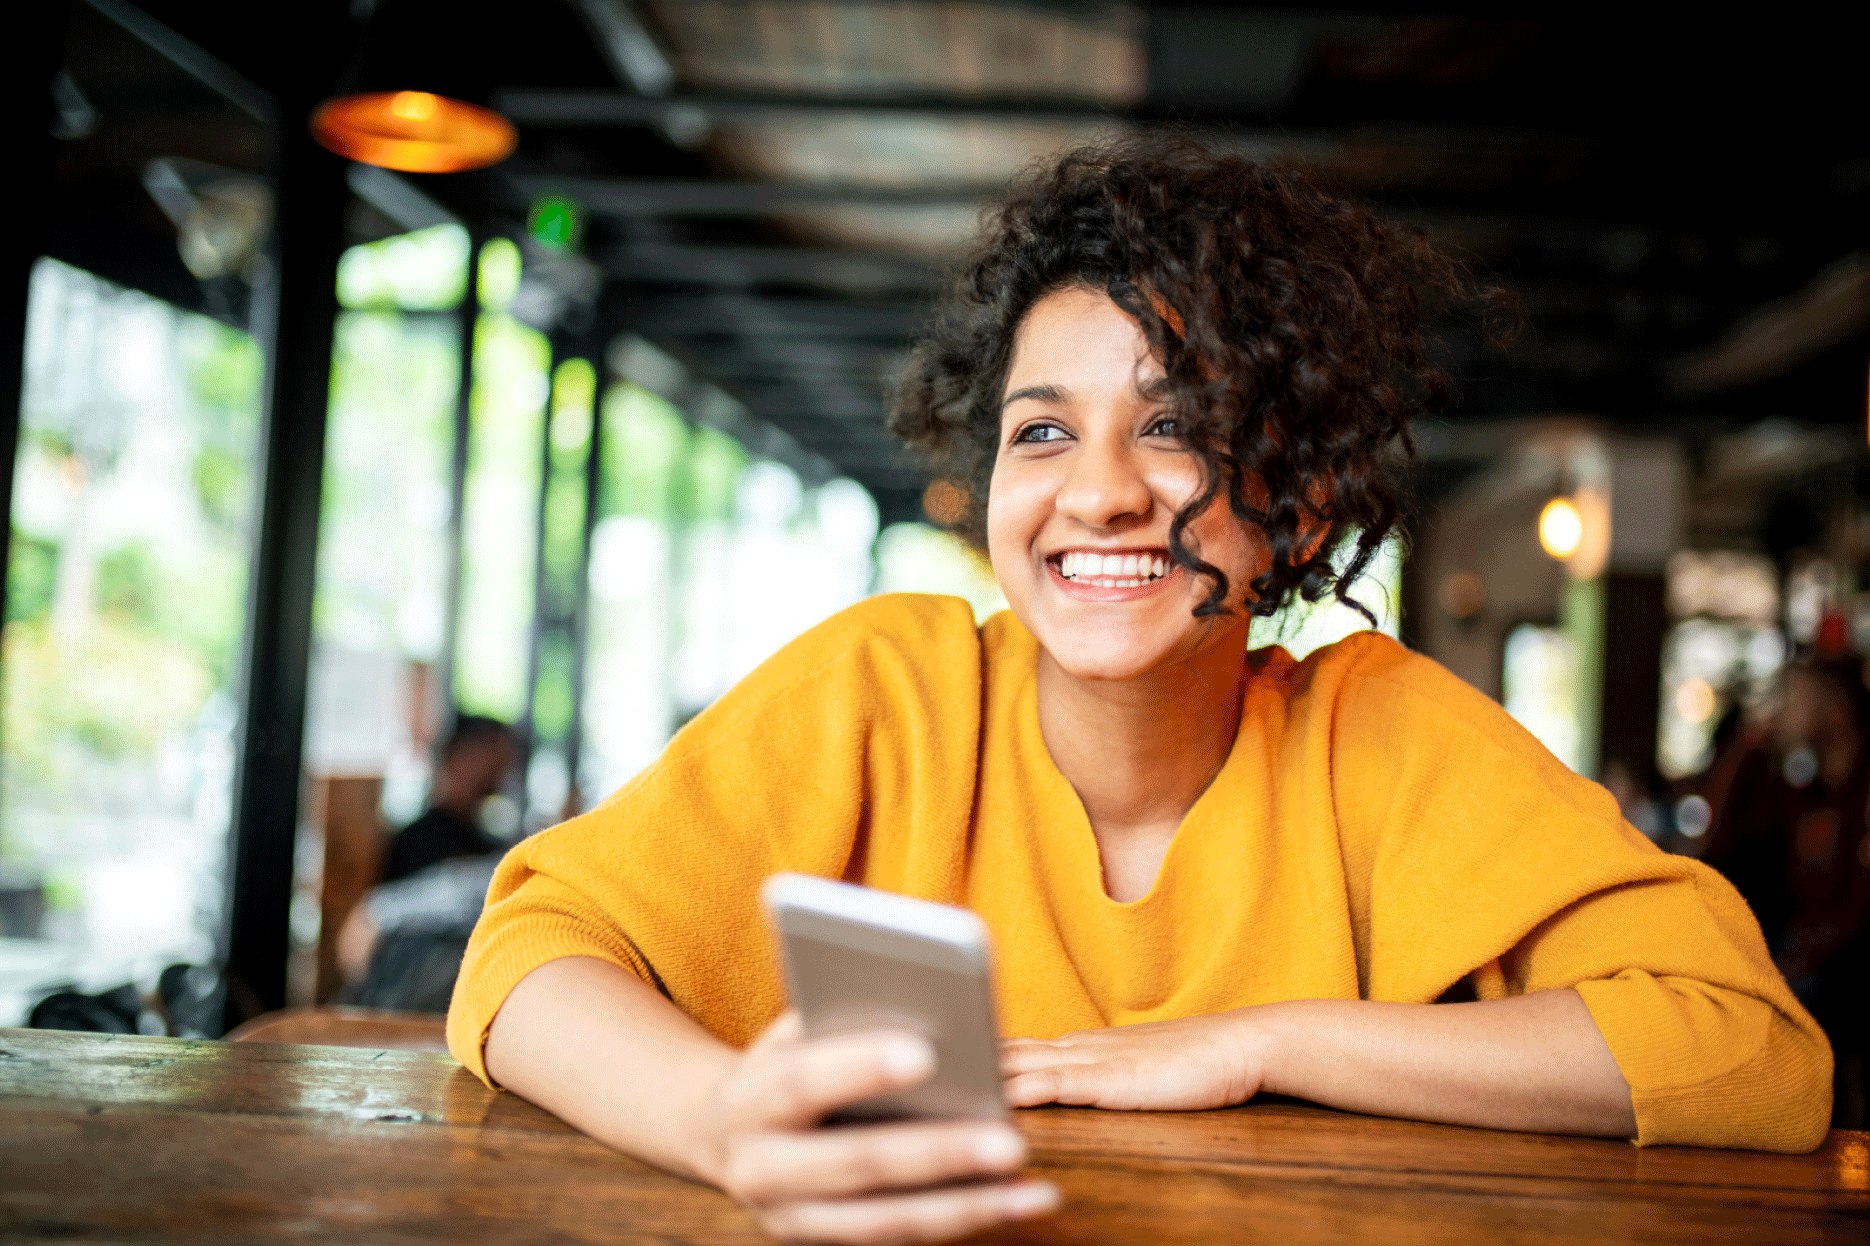 Smiling woman wearing a yellow t-shirt holding a mobile phone.